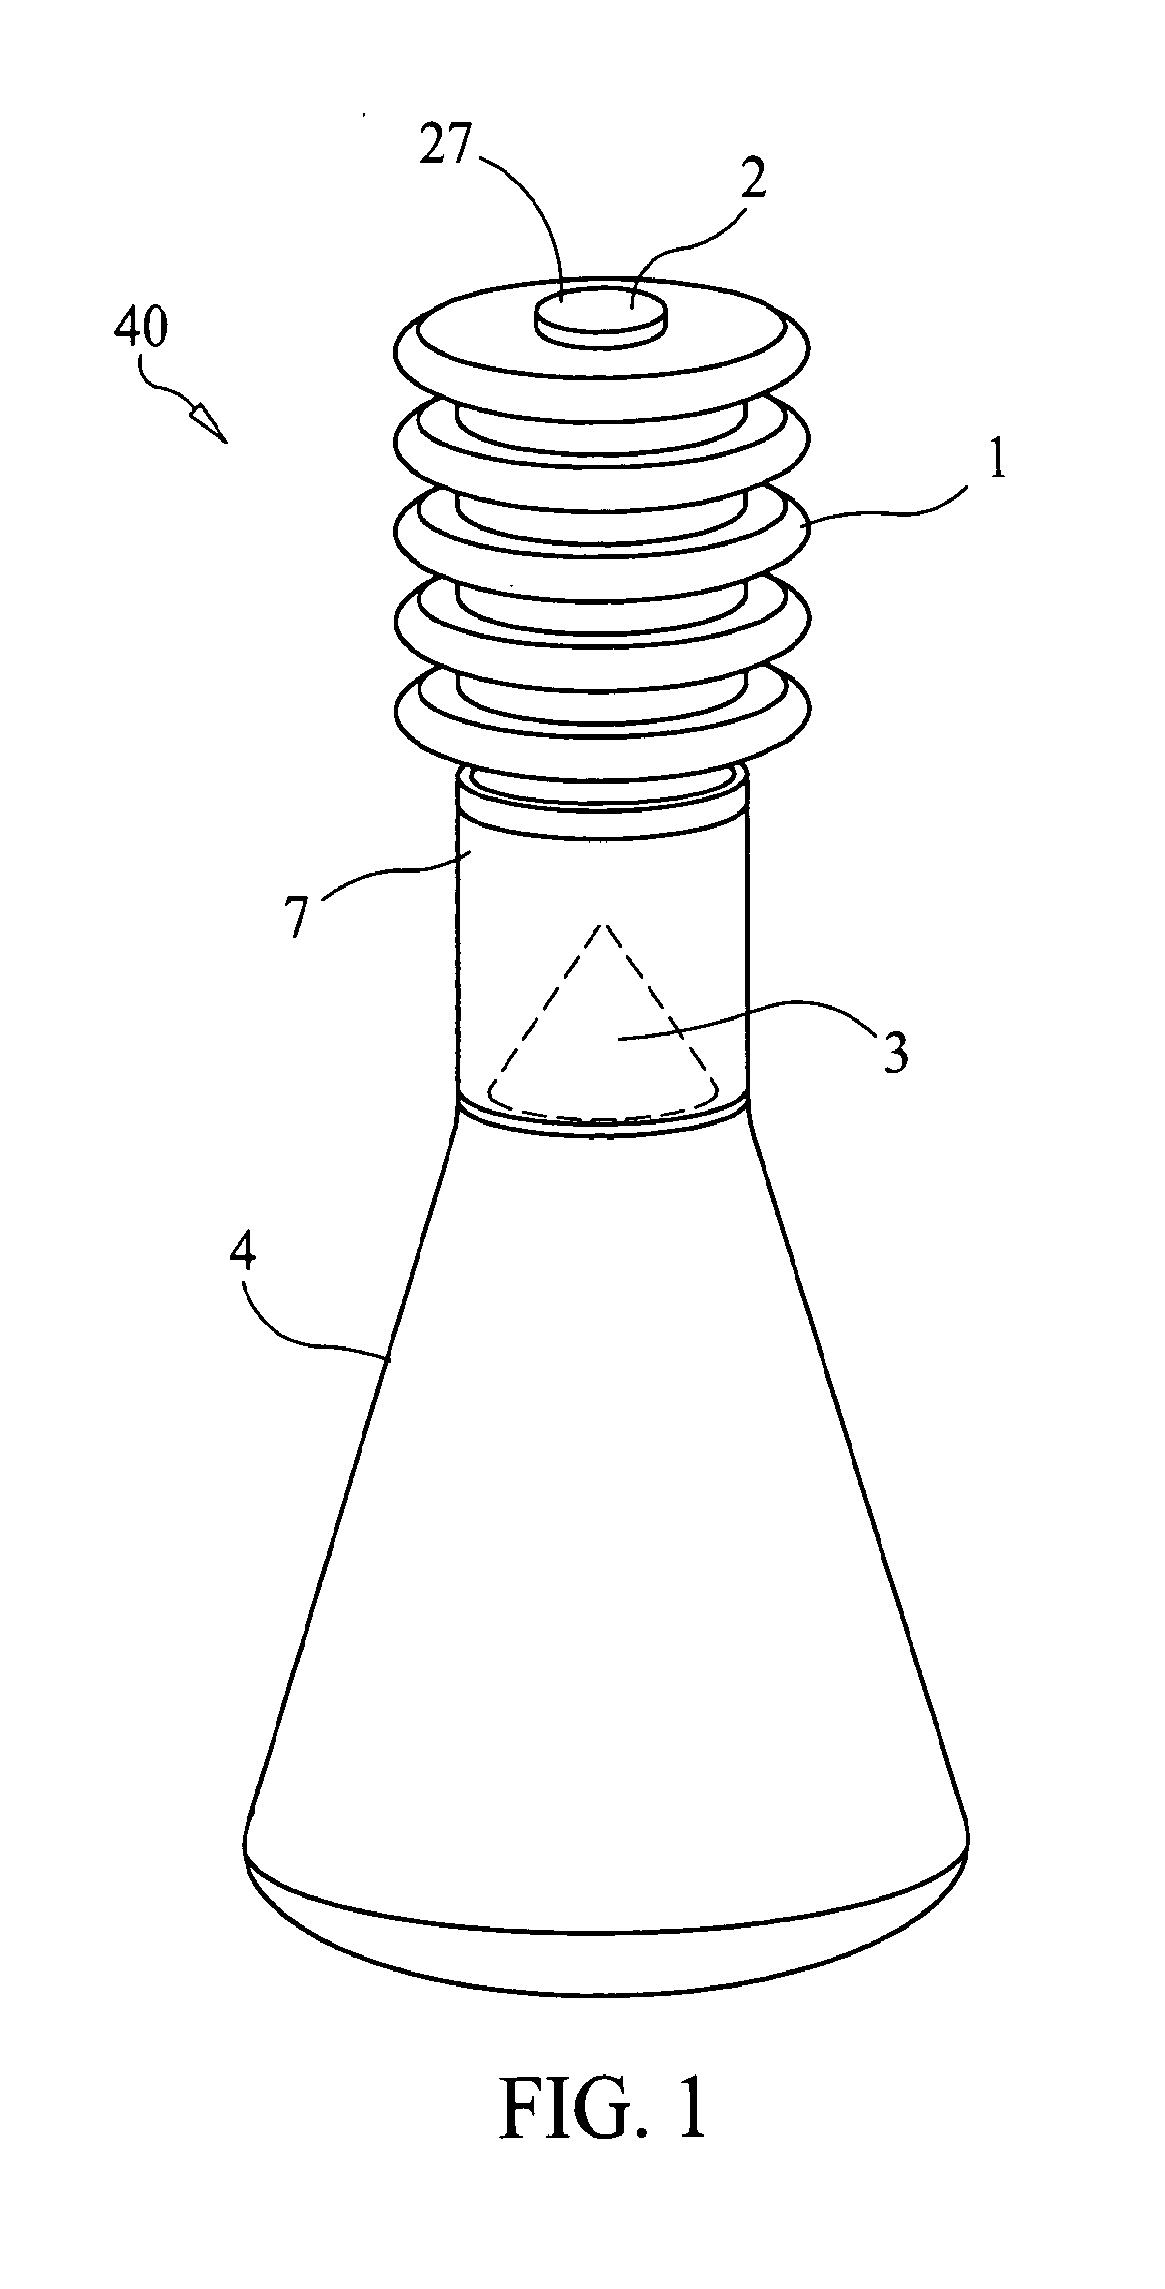 Self-contained breathing closure and container